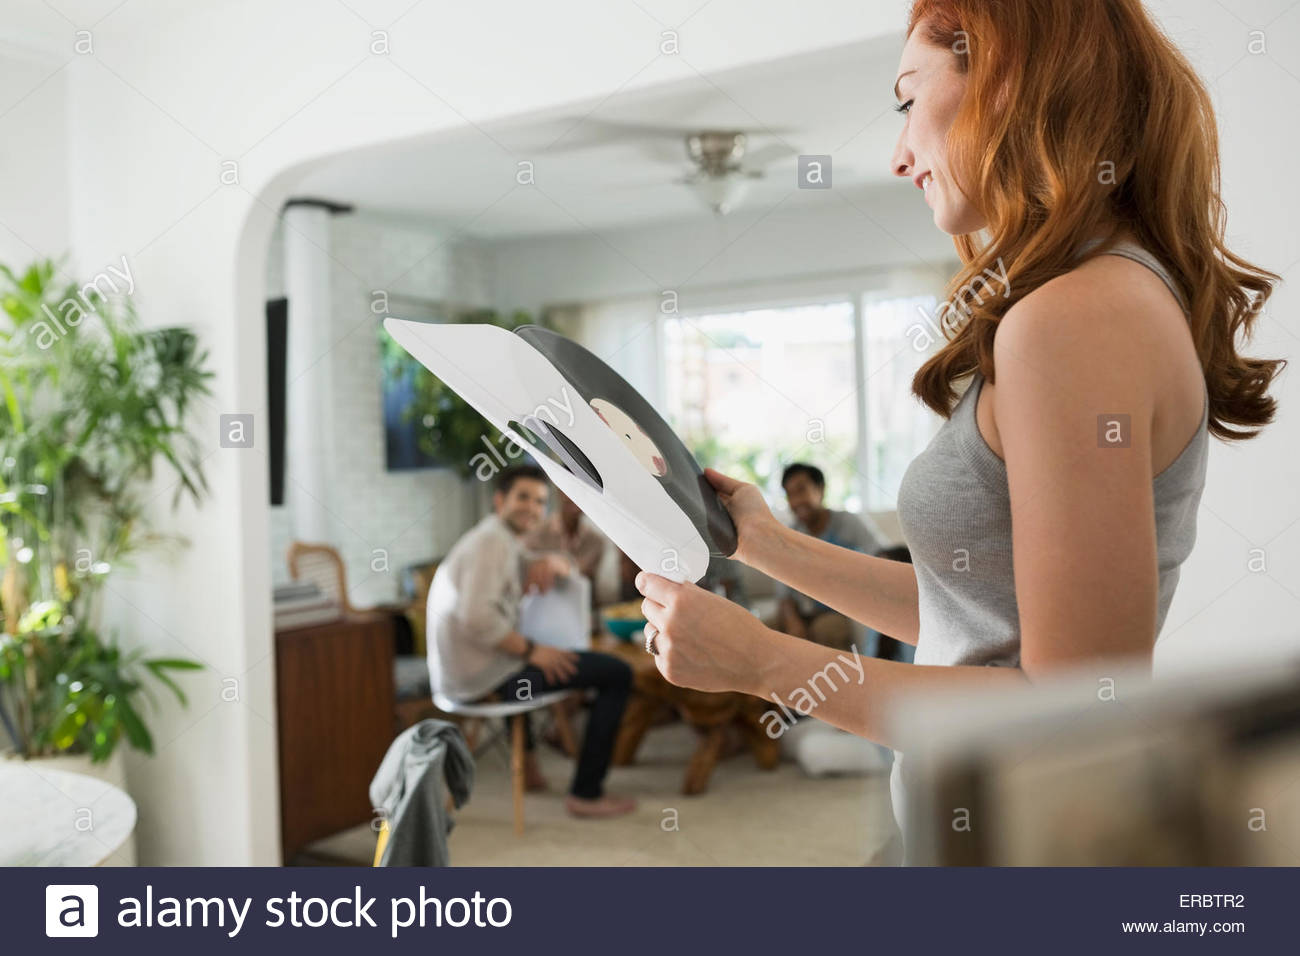 Smiling woman looking at vinyl music record Stock Photo